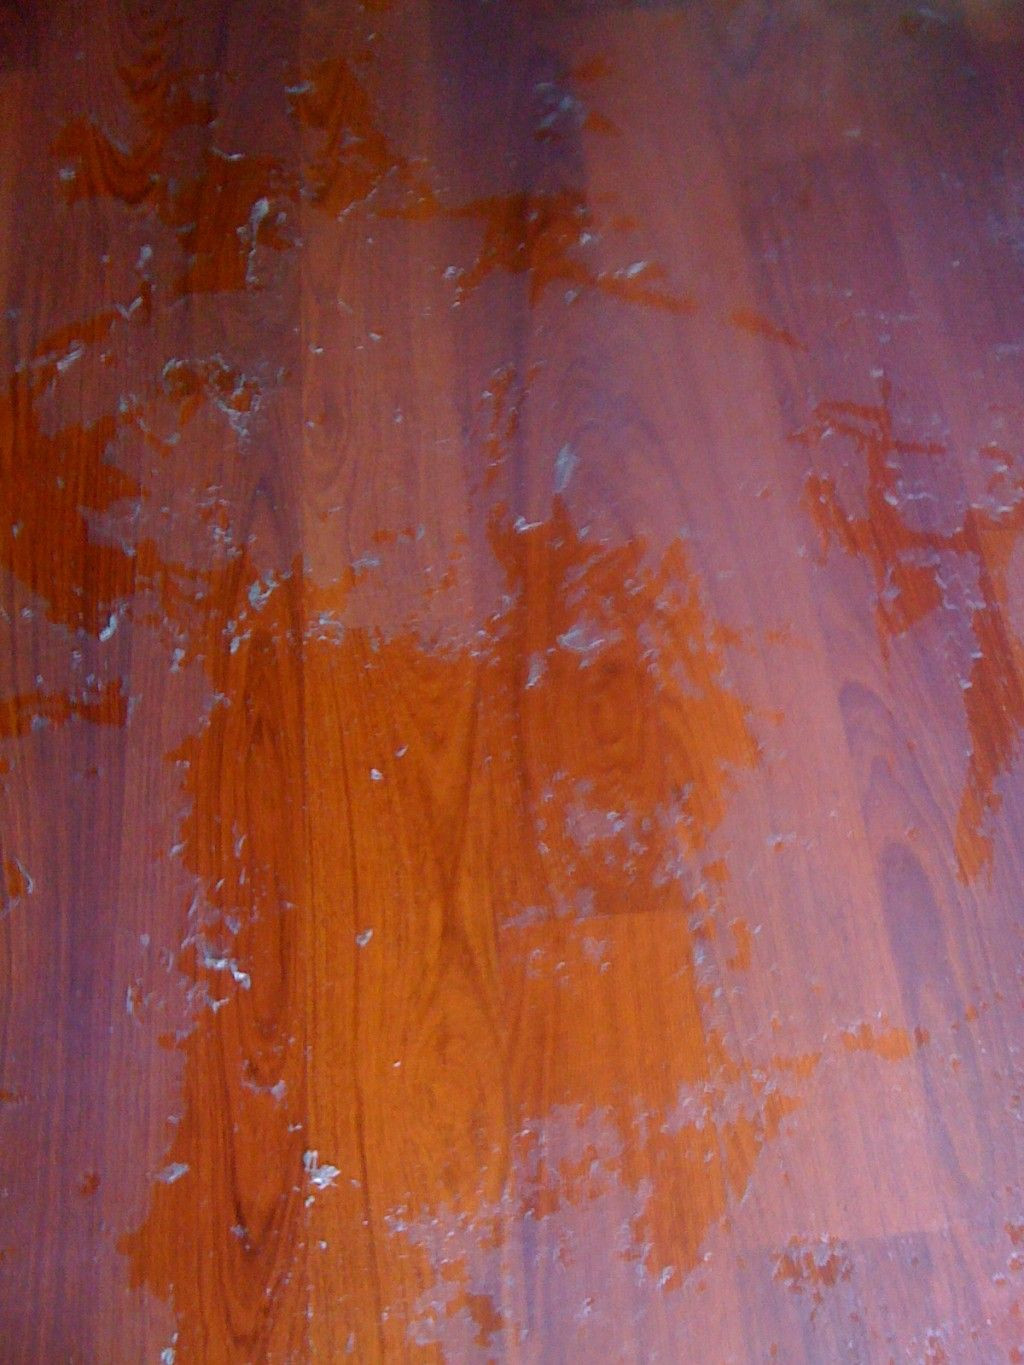 hardwood flooring warehouse los angeles of how to remove wax and oil soap cleaners from wood floors recipes intended for how to remove oily or wax build up from cleaning or polishing solutions from wood floors